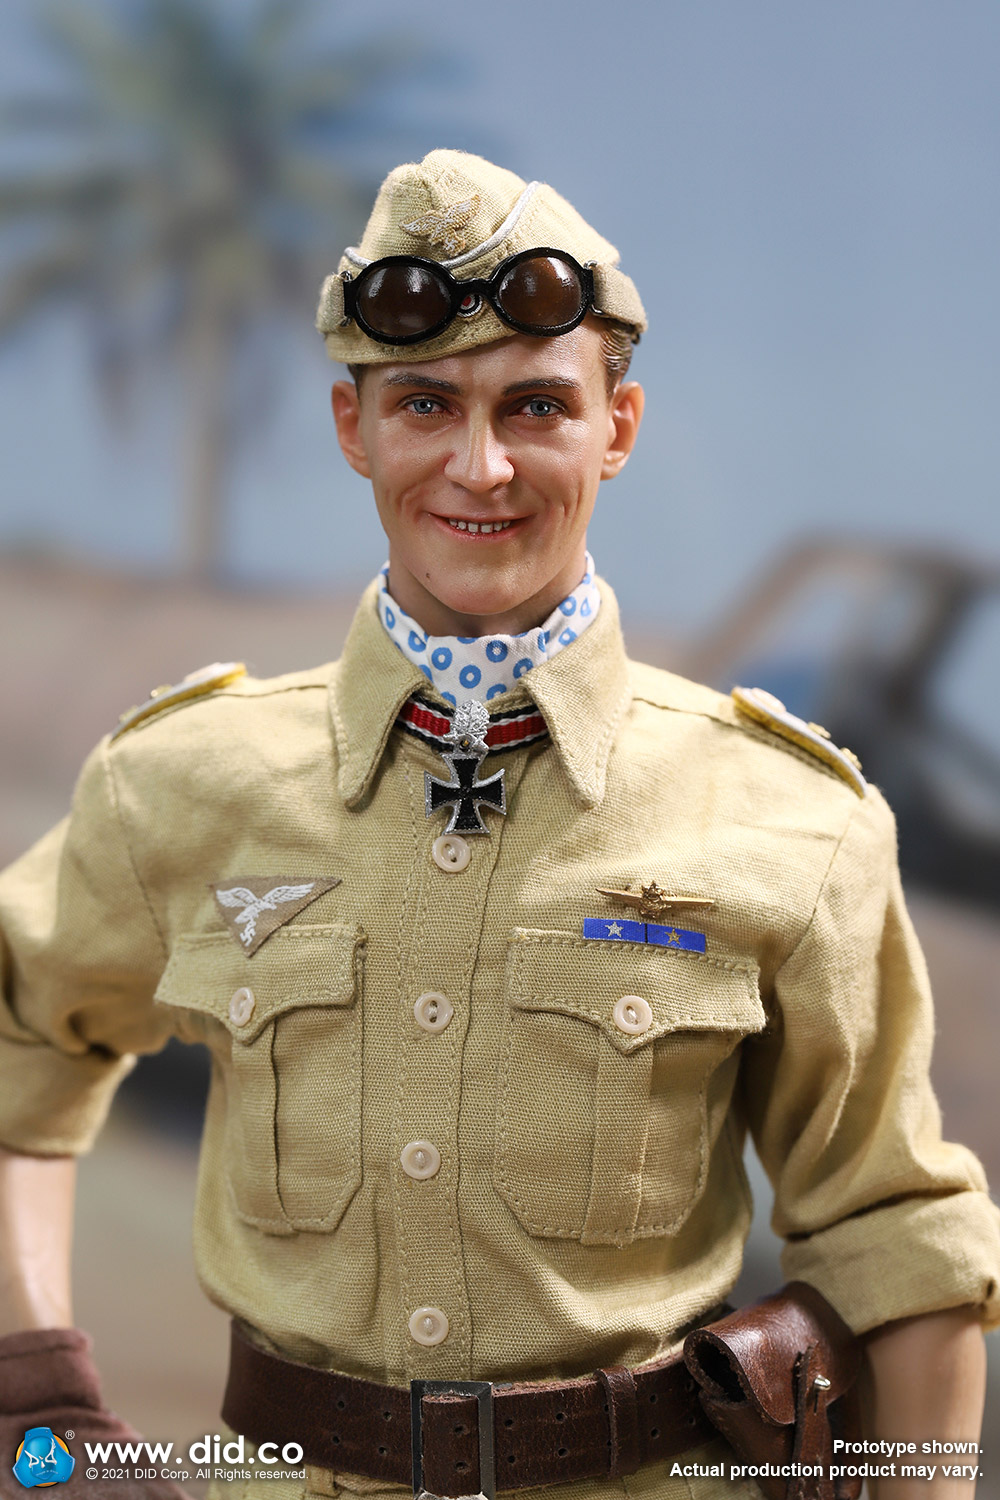 historical - NEW PRODUCT: D80154 WWII German Luftwaffe Flying Ace “Star Of Africa” – Hans-Joachim Marseille & E60060  Diorama Of “Star Of Africa” 31120